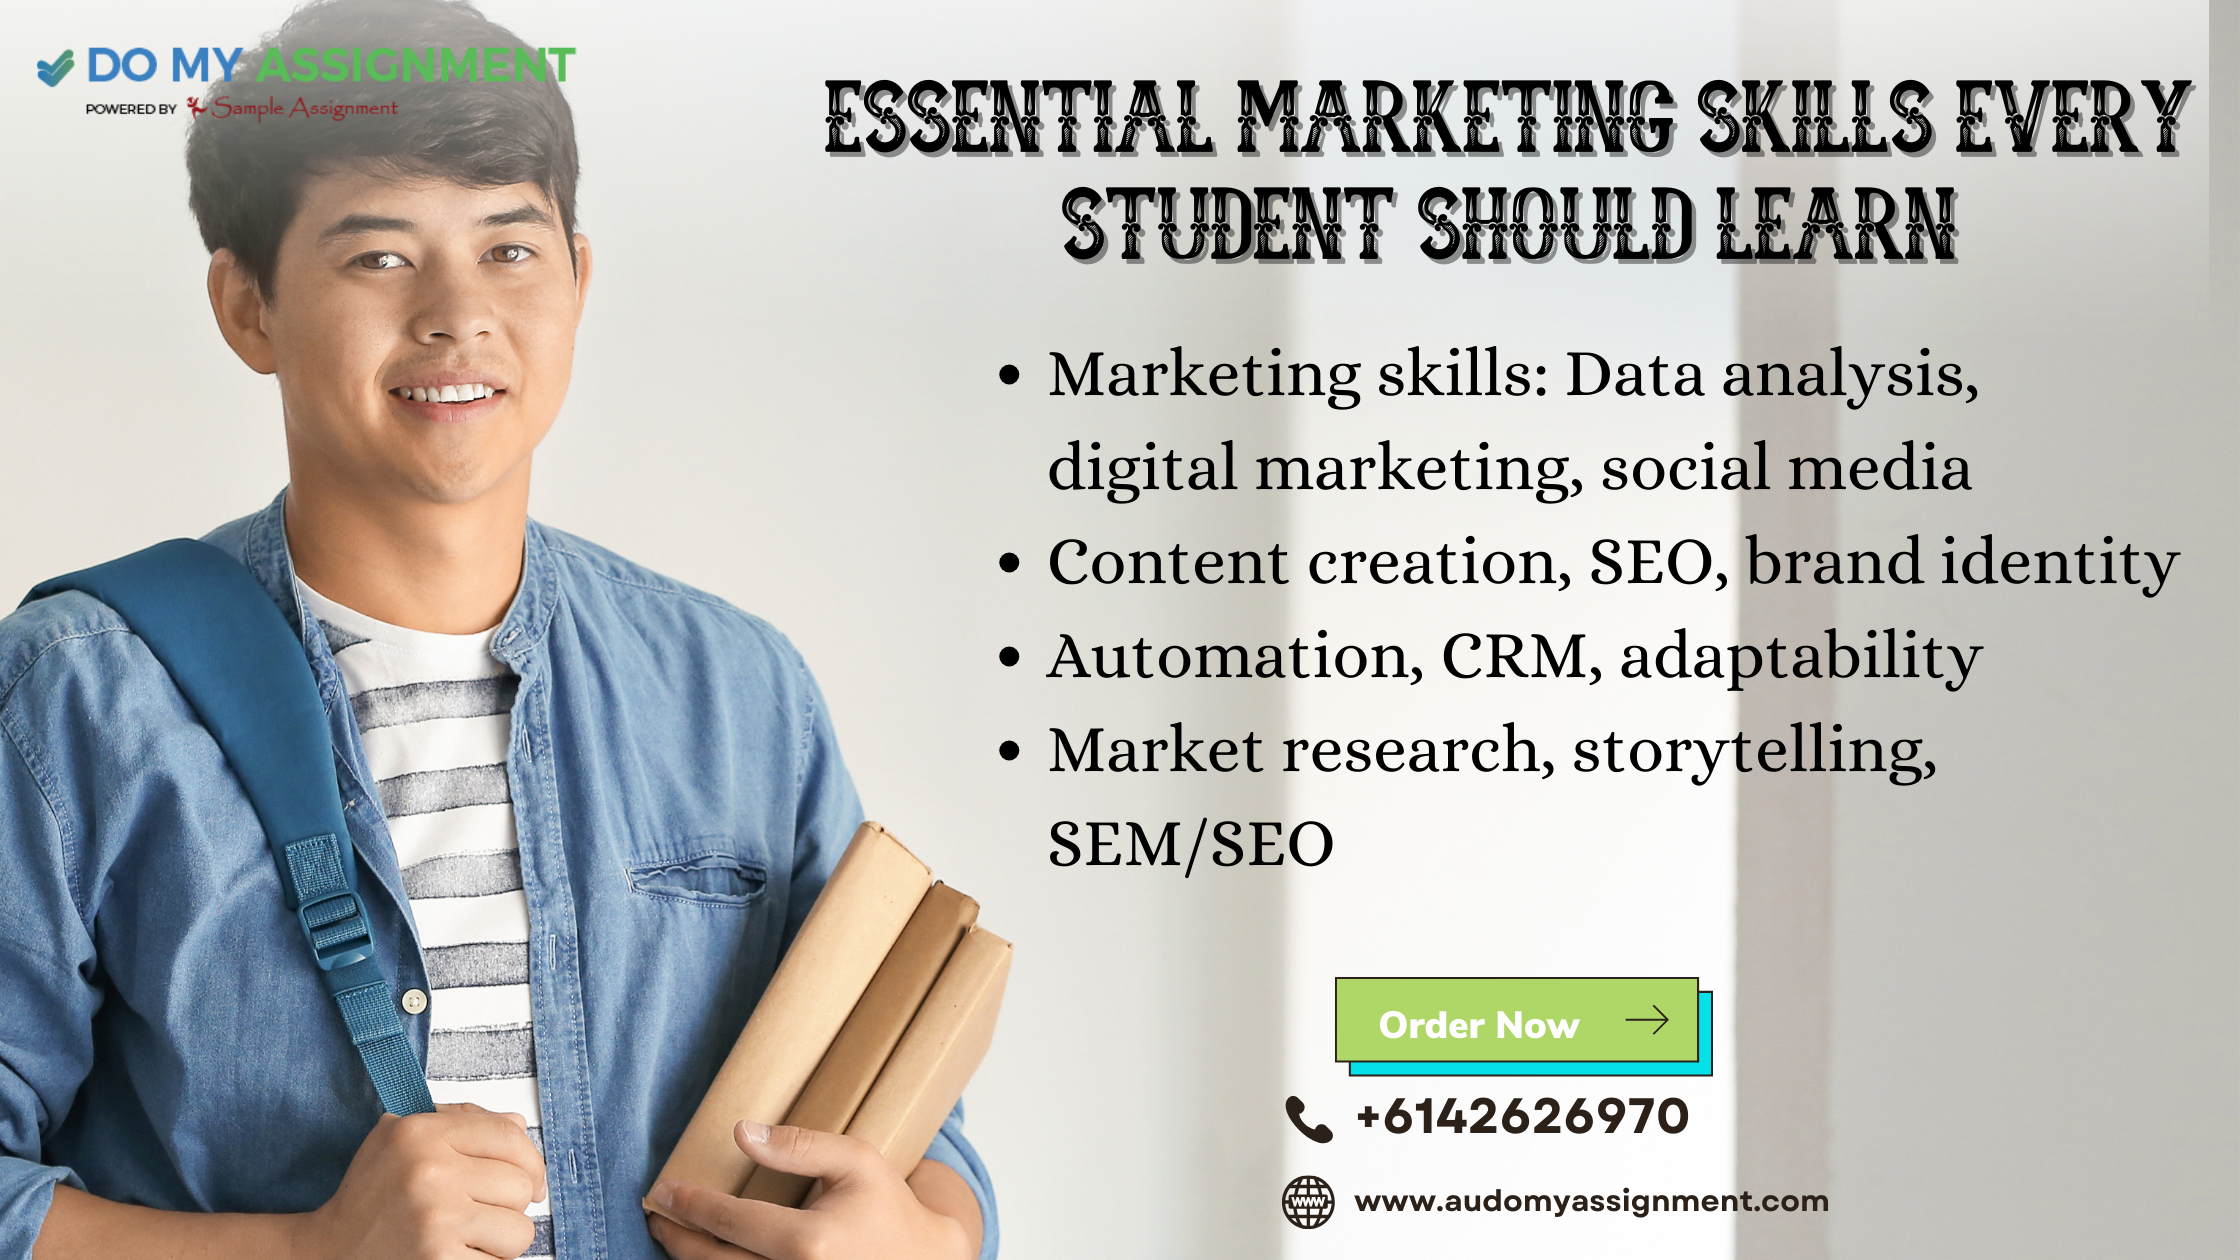 A vibrant image featuring students with textbooks, and a notepad, creating a productive atmosphere. The text overlay reads, "Essential Marketing Skills Every Student Should Learn" emphasizing a focus on efficient and reliable academic support.